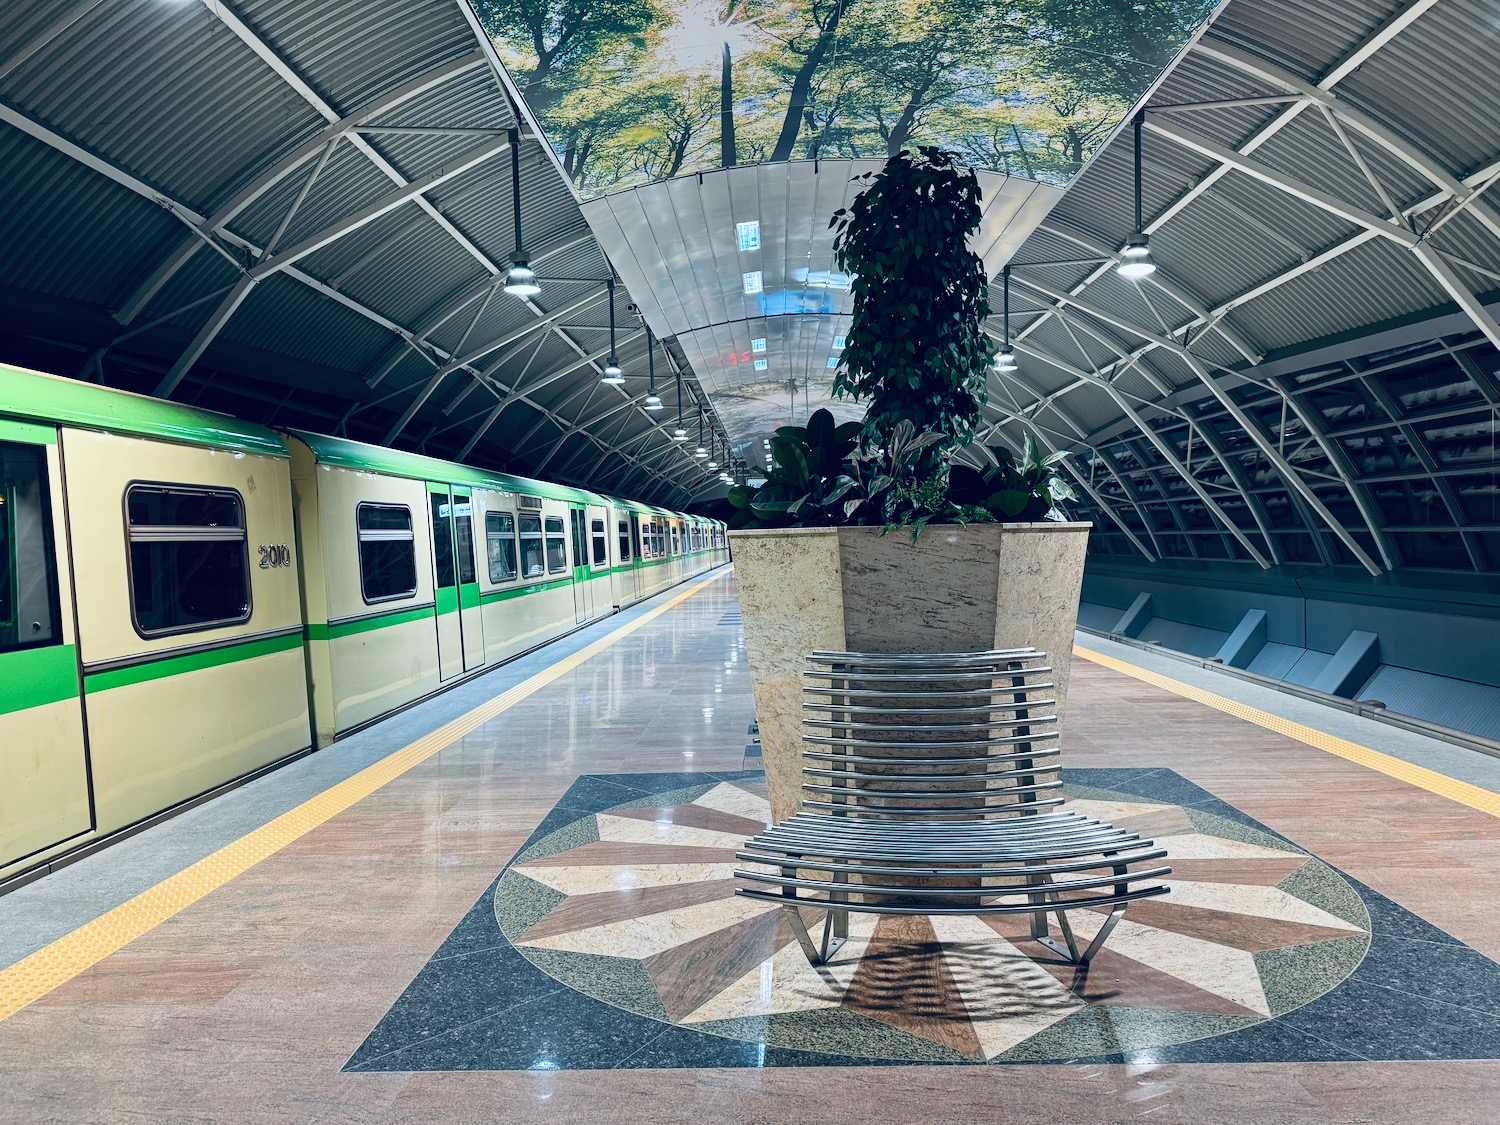 a planter in a train station